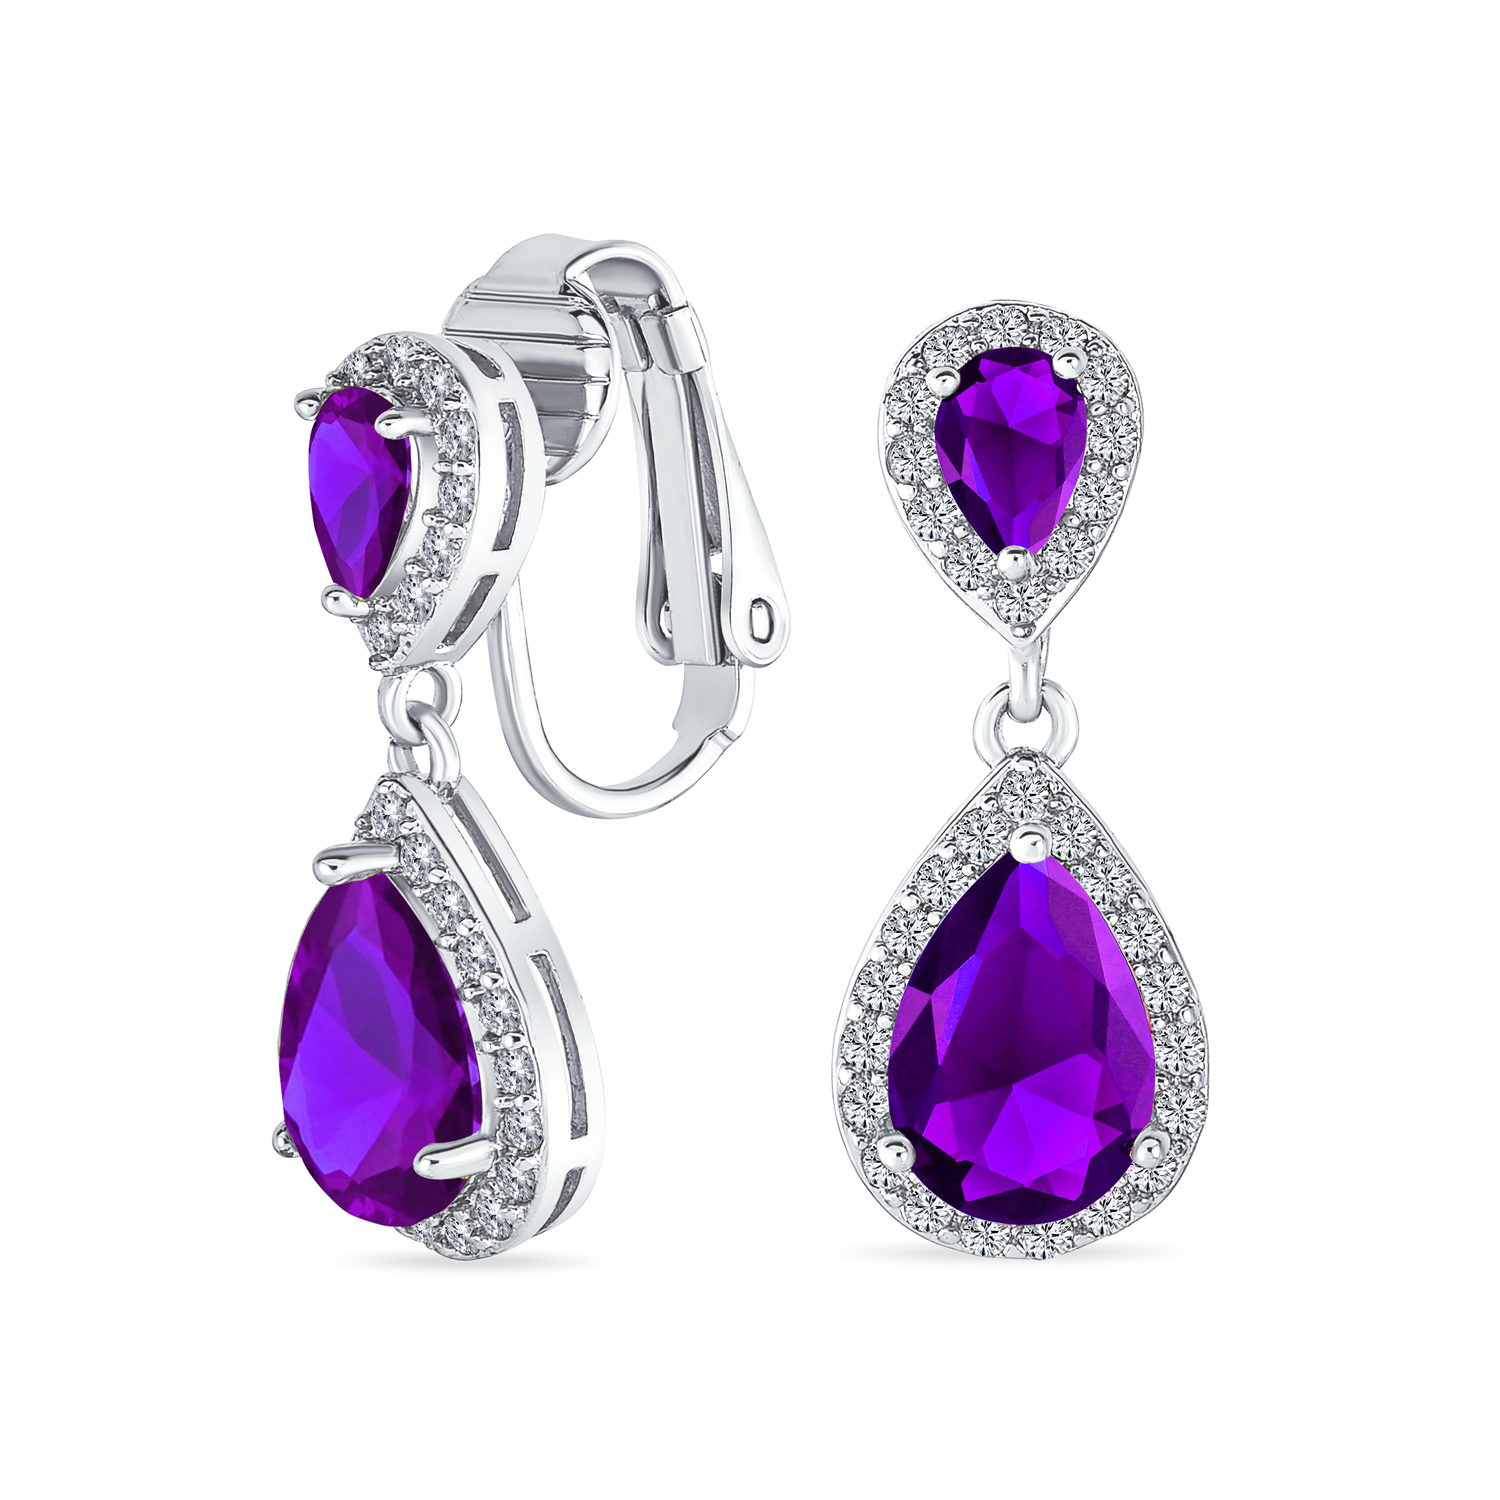 No.89 Amethyst with Apple Blossom Flower Earrings